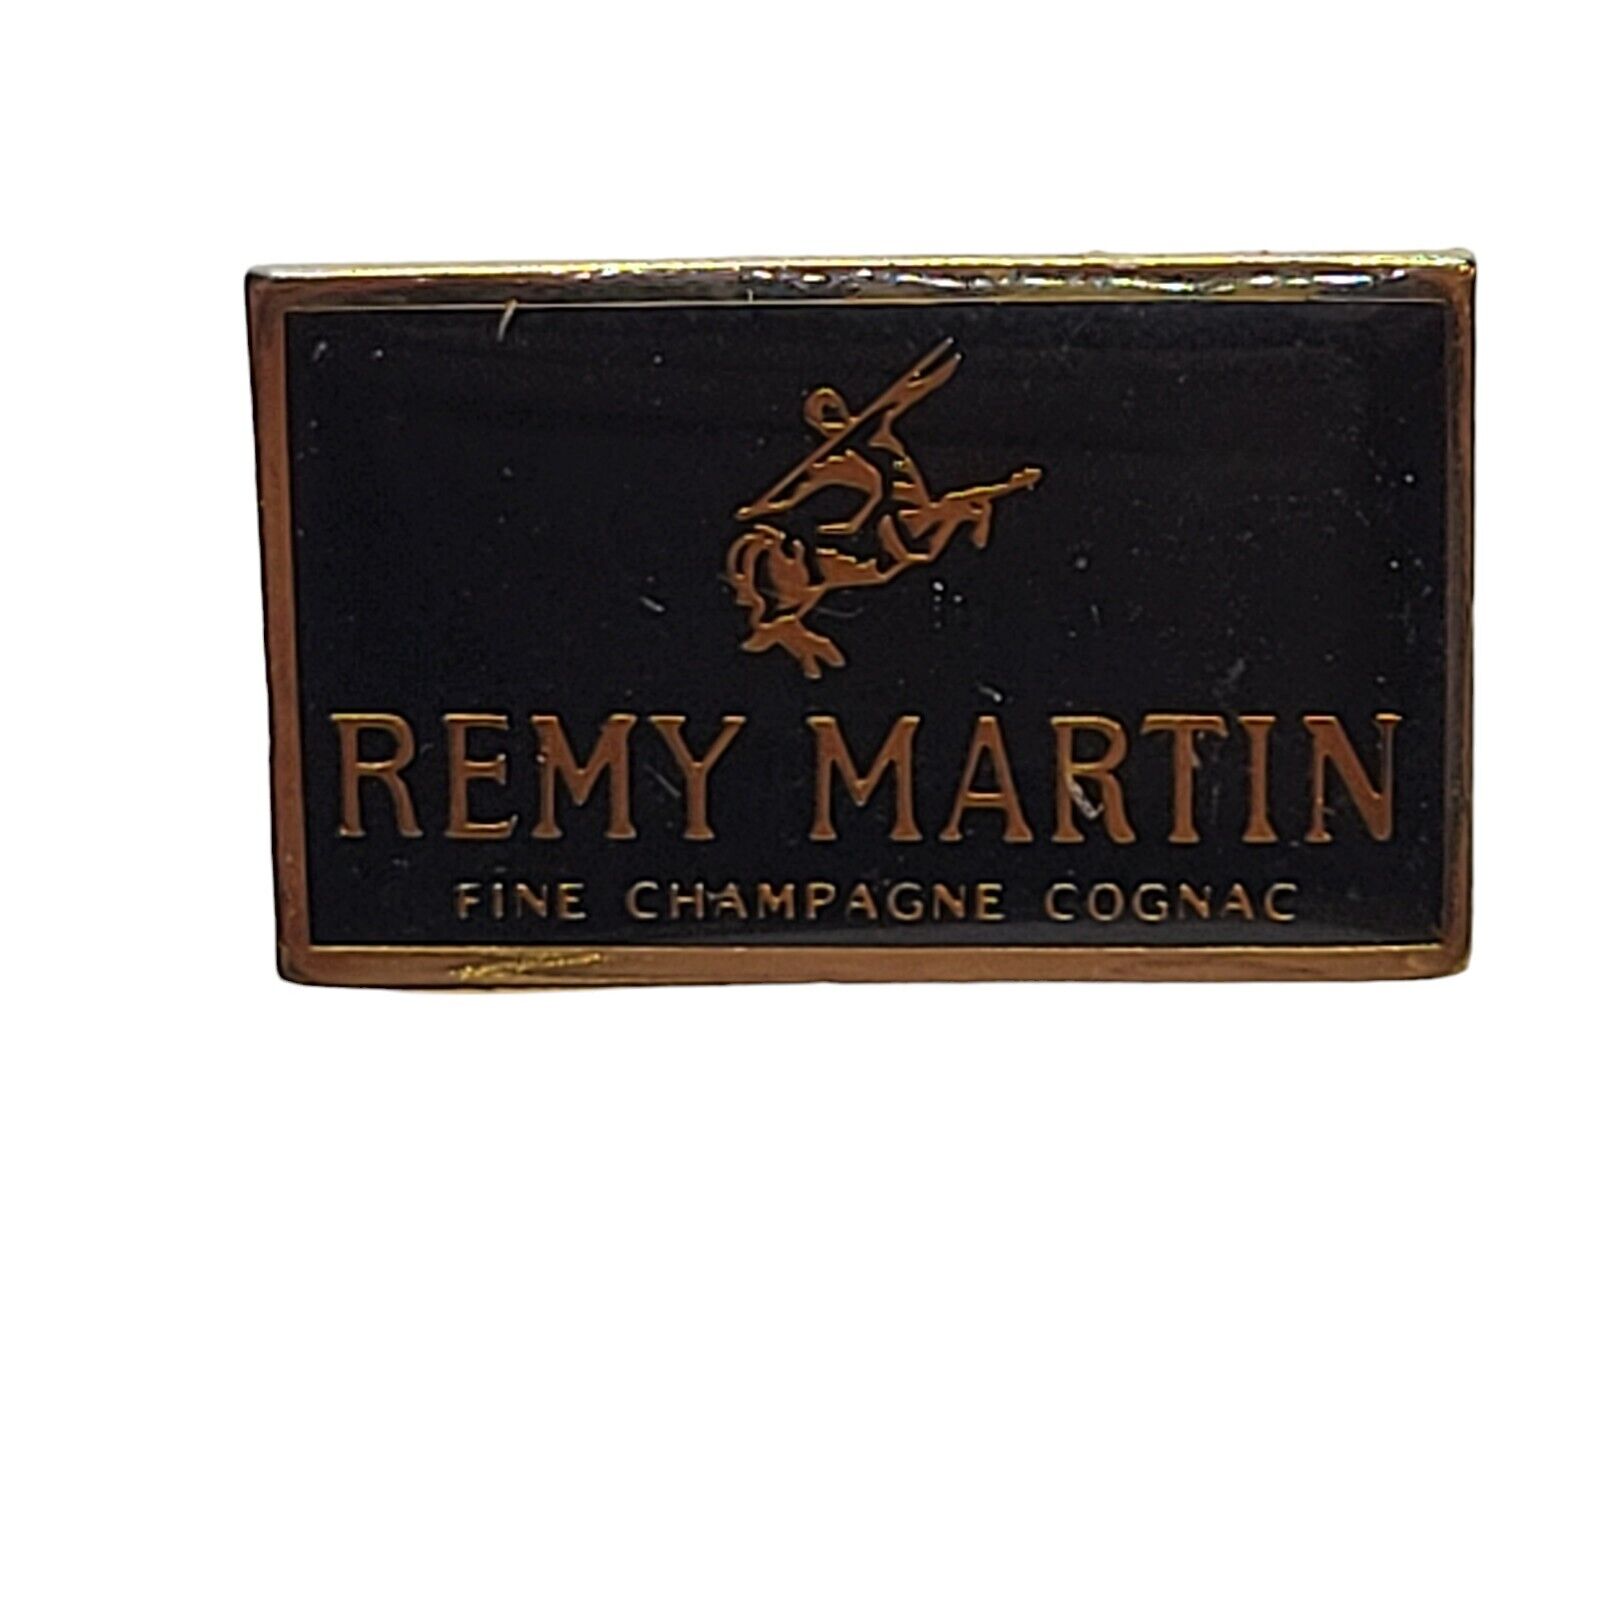 REMY MARTIN Fine Champagne Cognac Advertising Pin